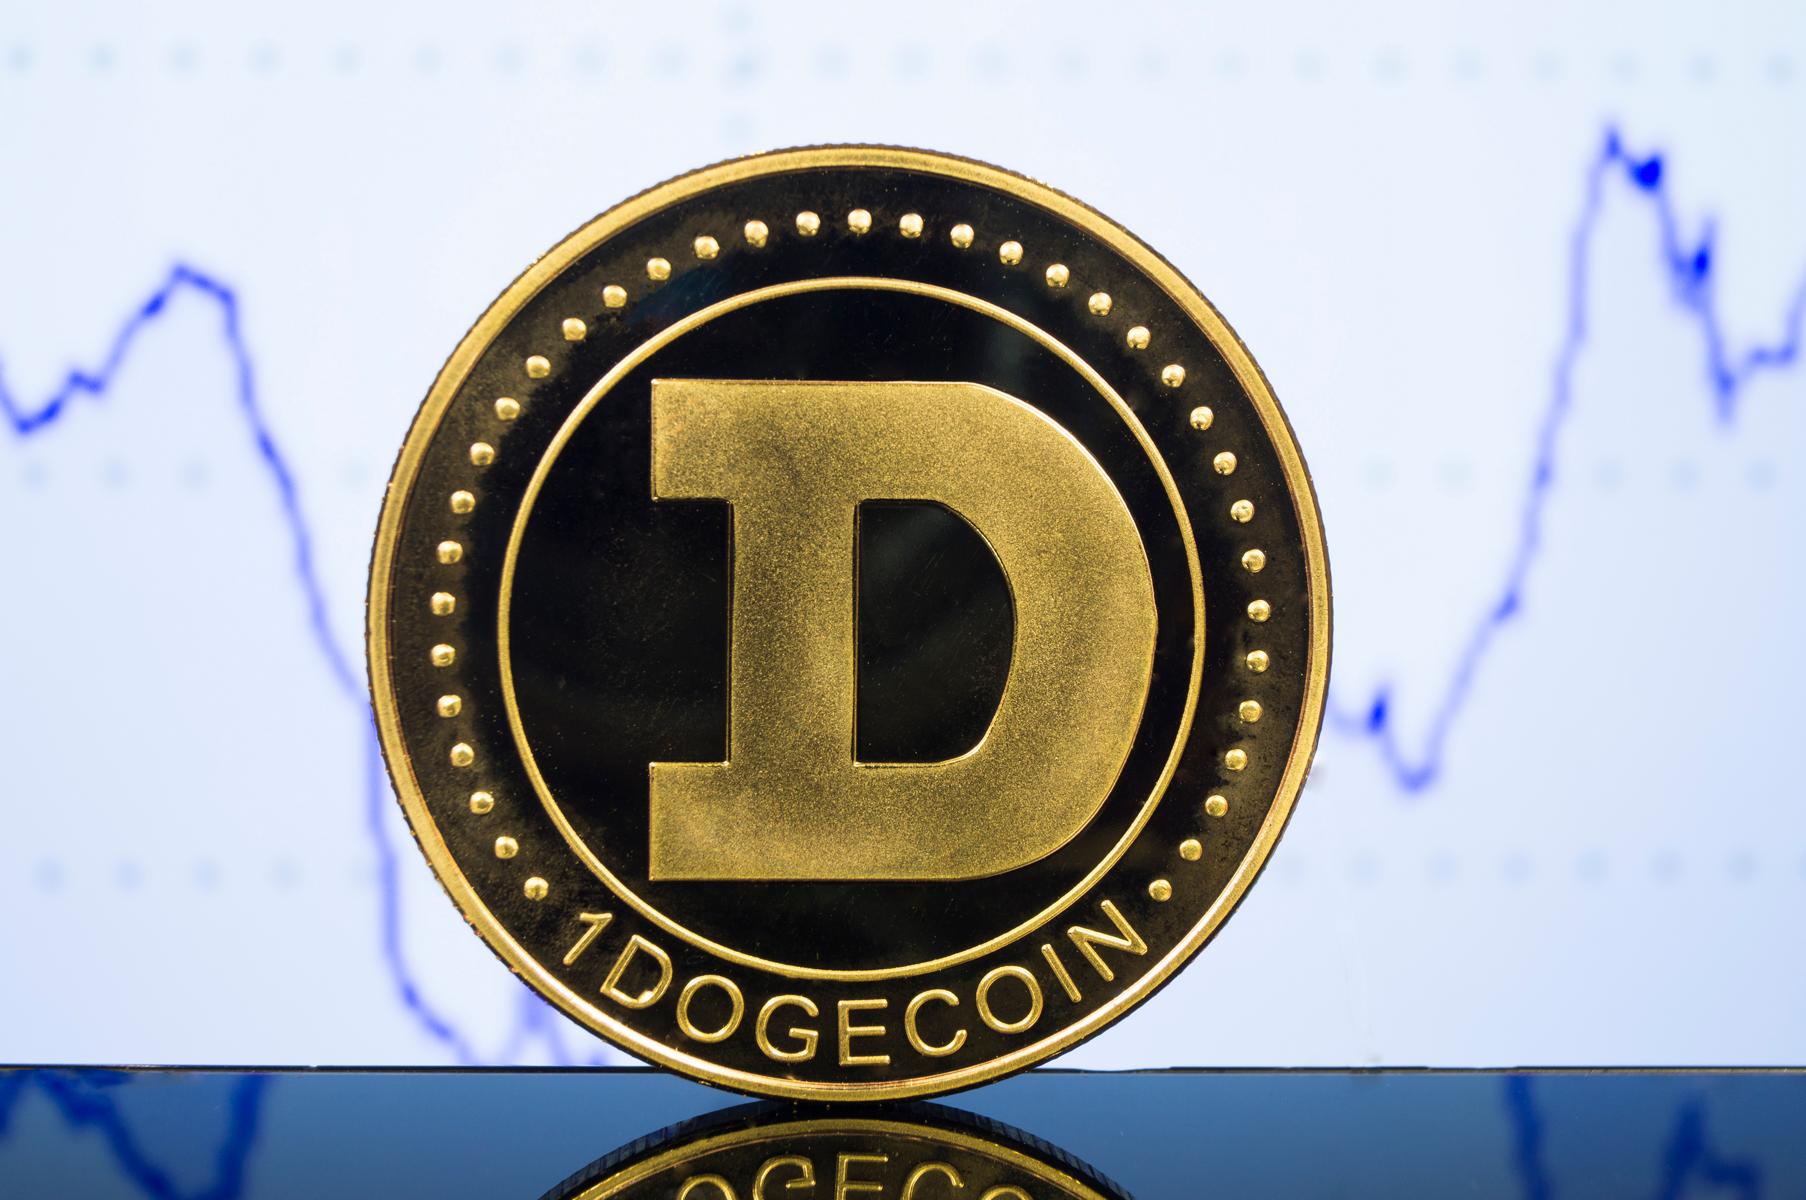 Dogecoin’s Potential as X’s Primary Currency: DOGE Price Surges by 11% Amid New York and California Payment License Progress